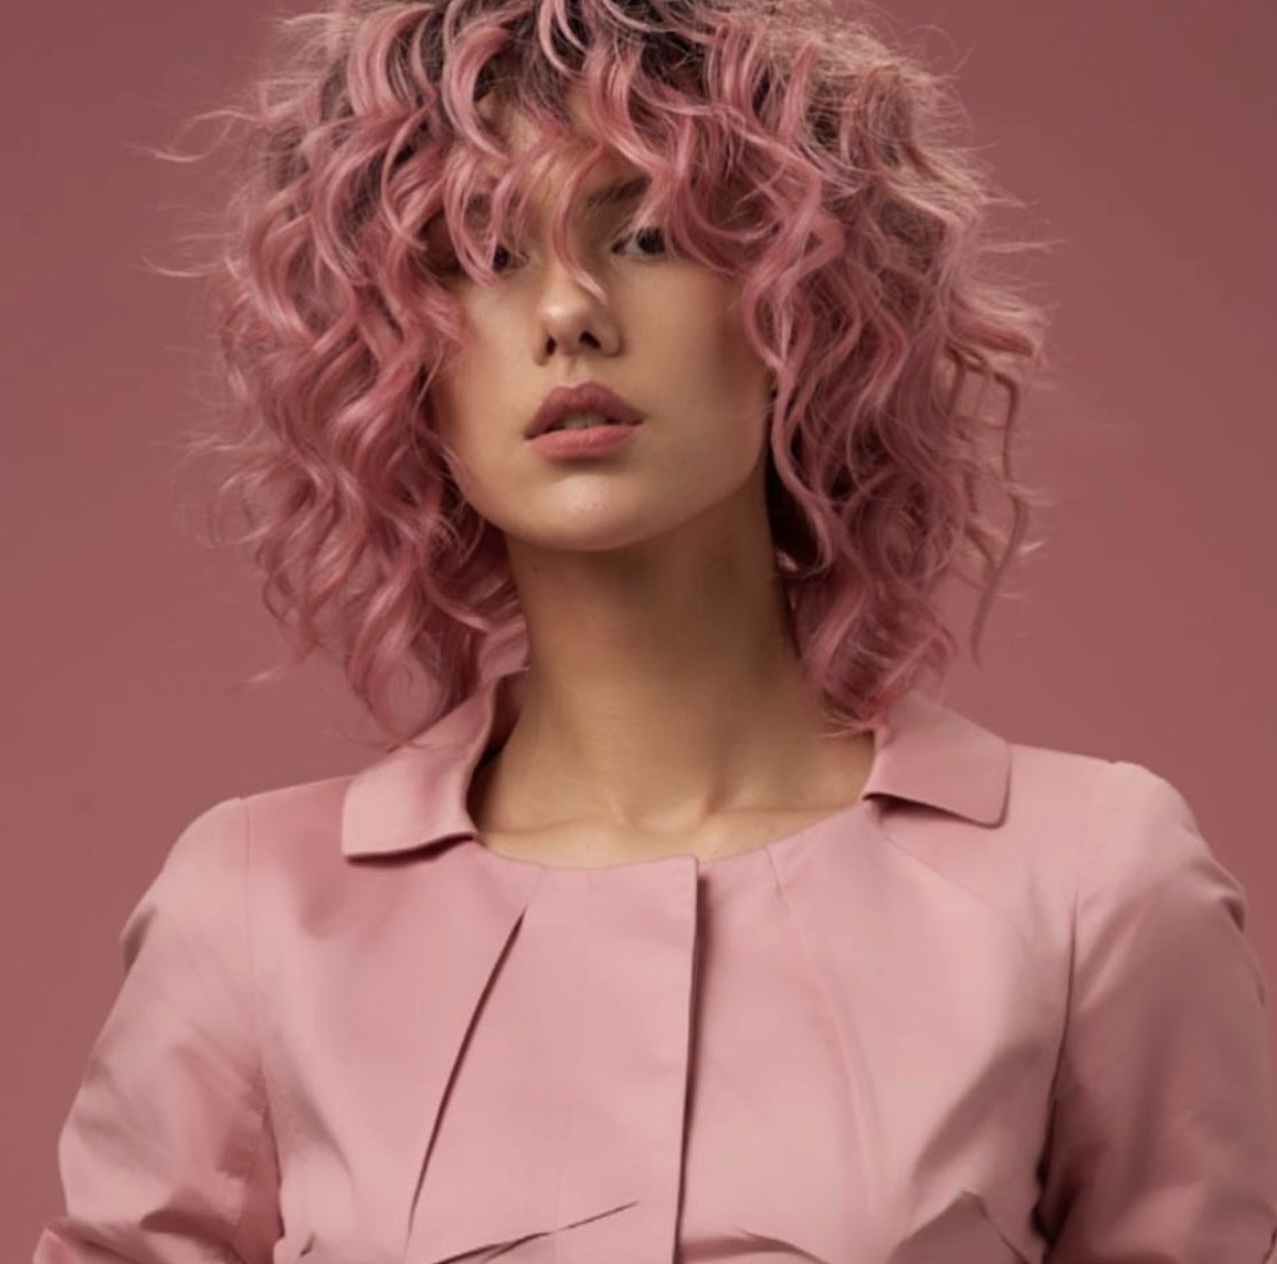 Woman with stylish, pink haircut set on pink background